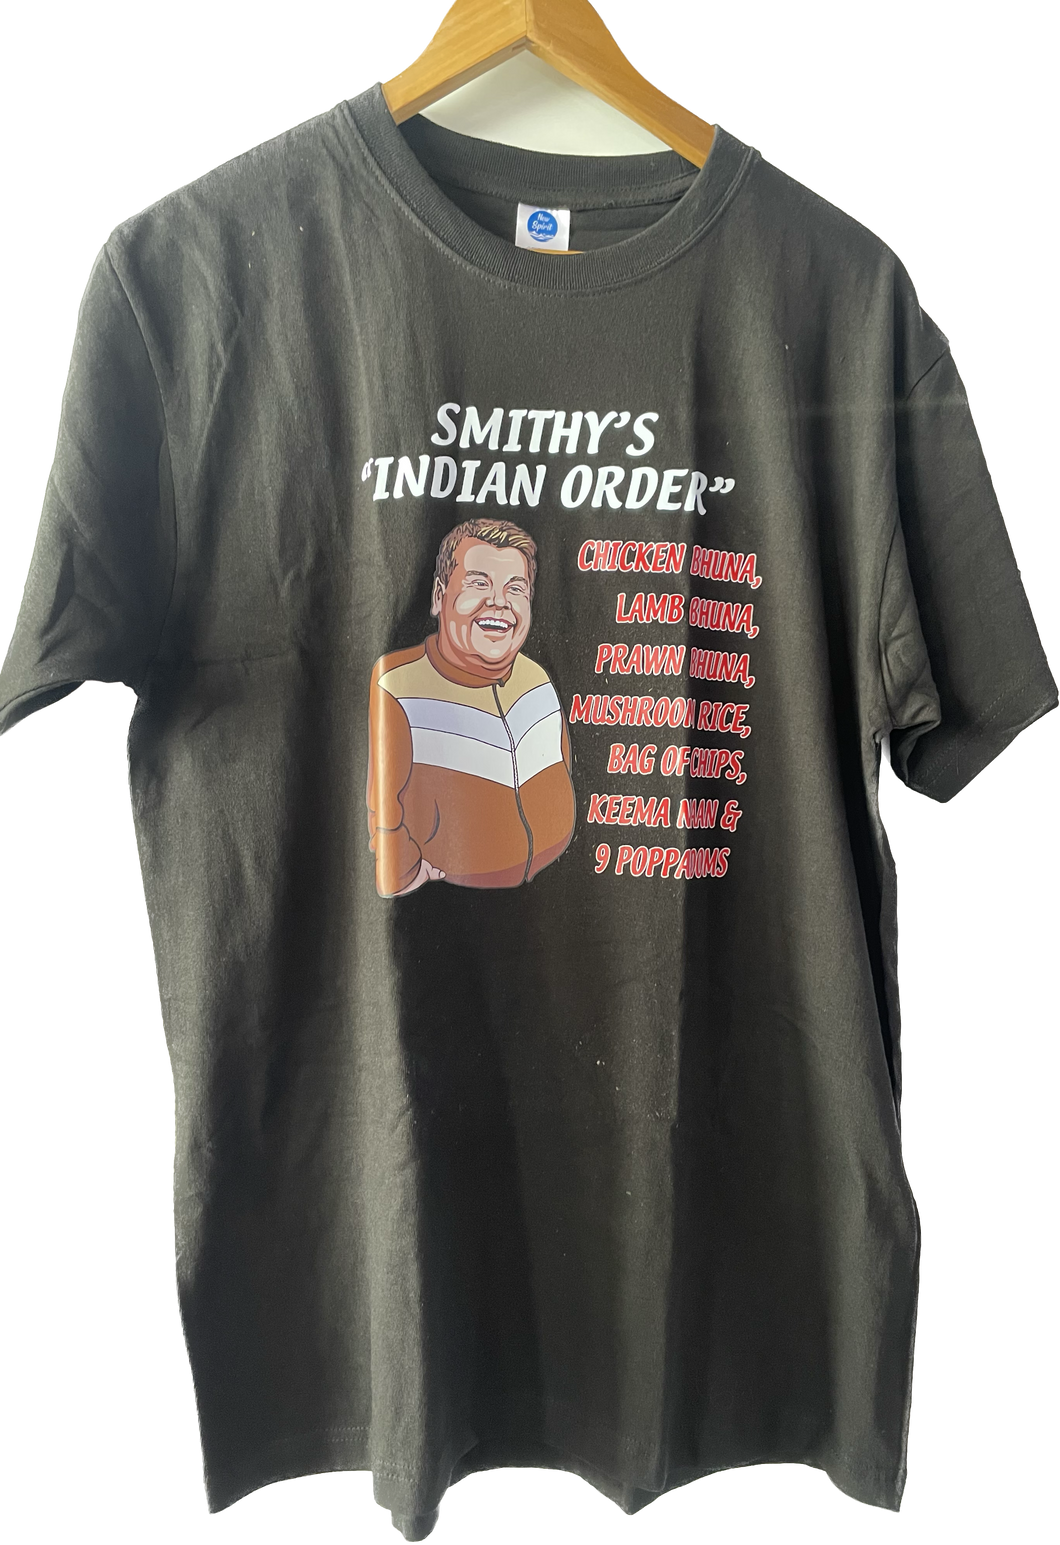 Smithy's Indian Order T-shirt